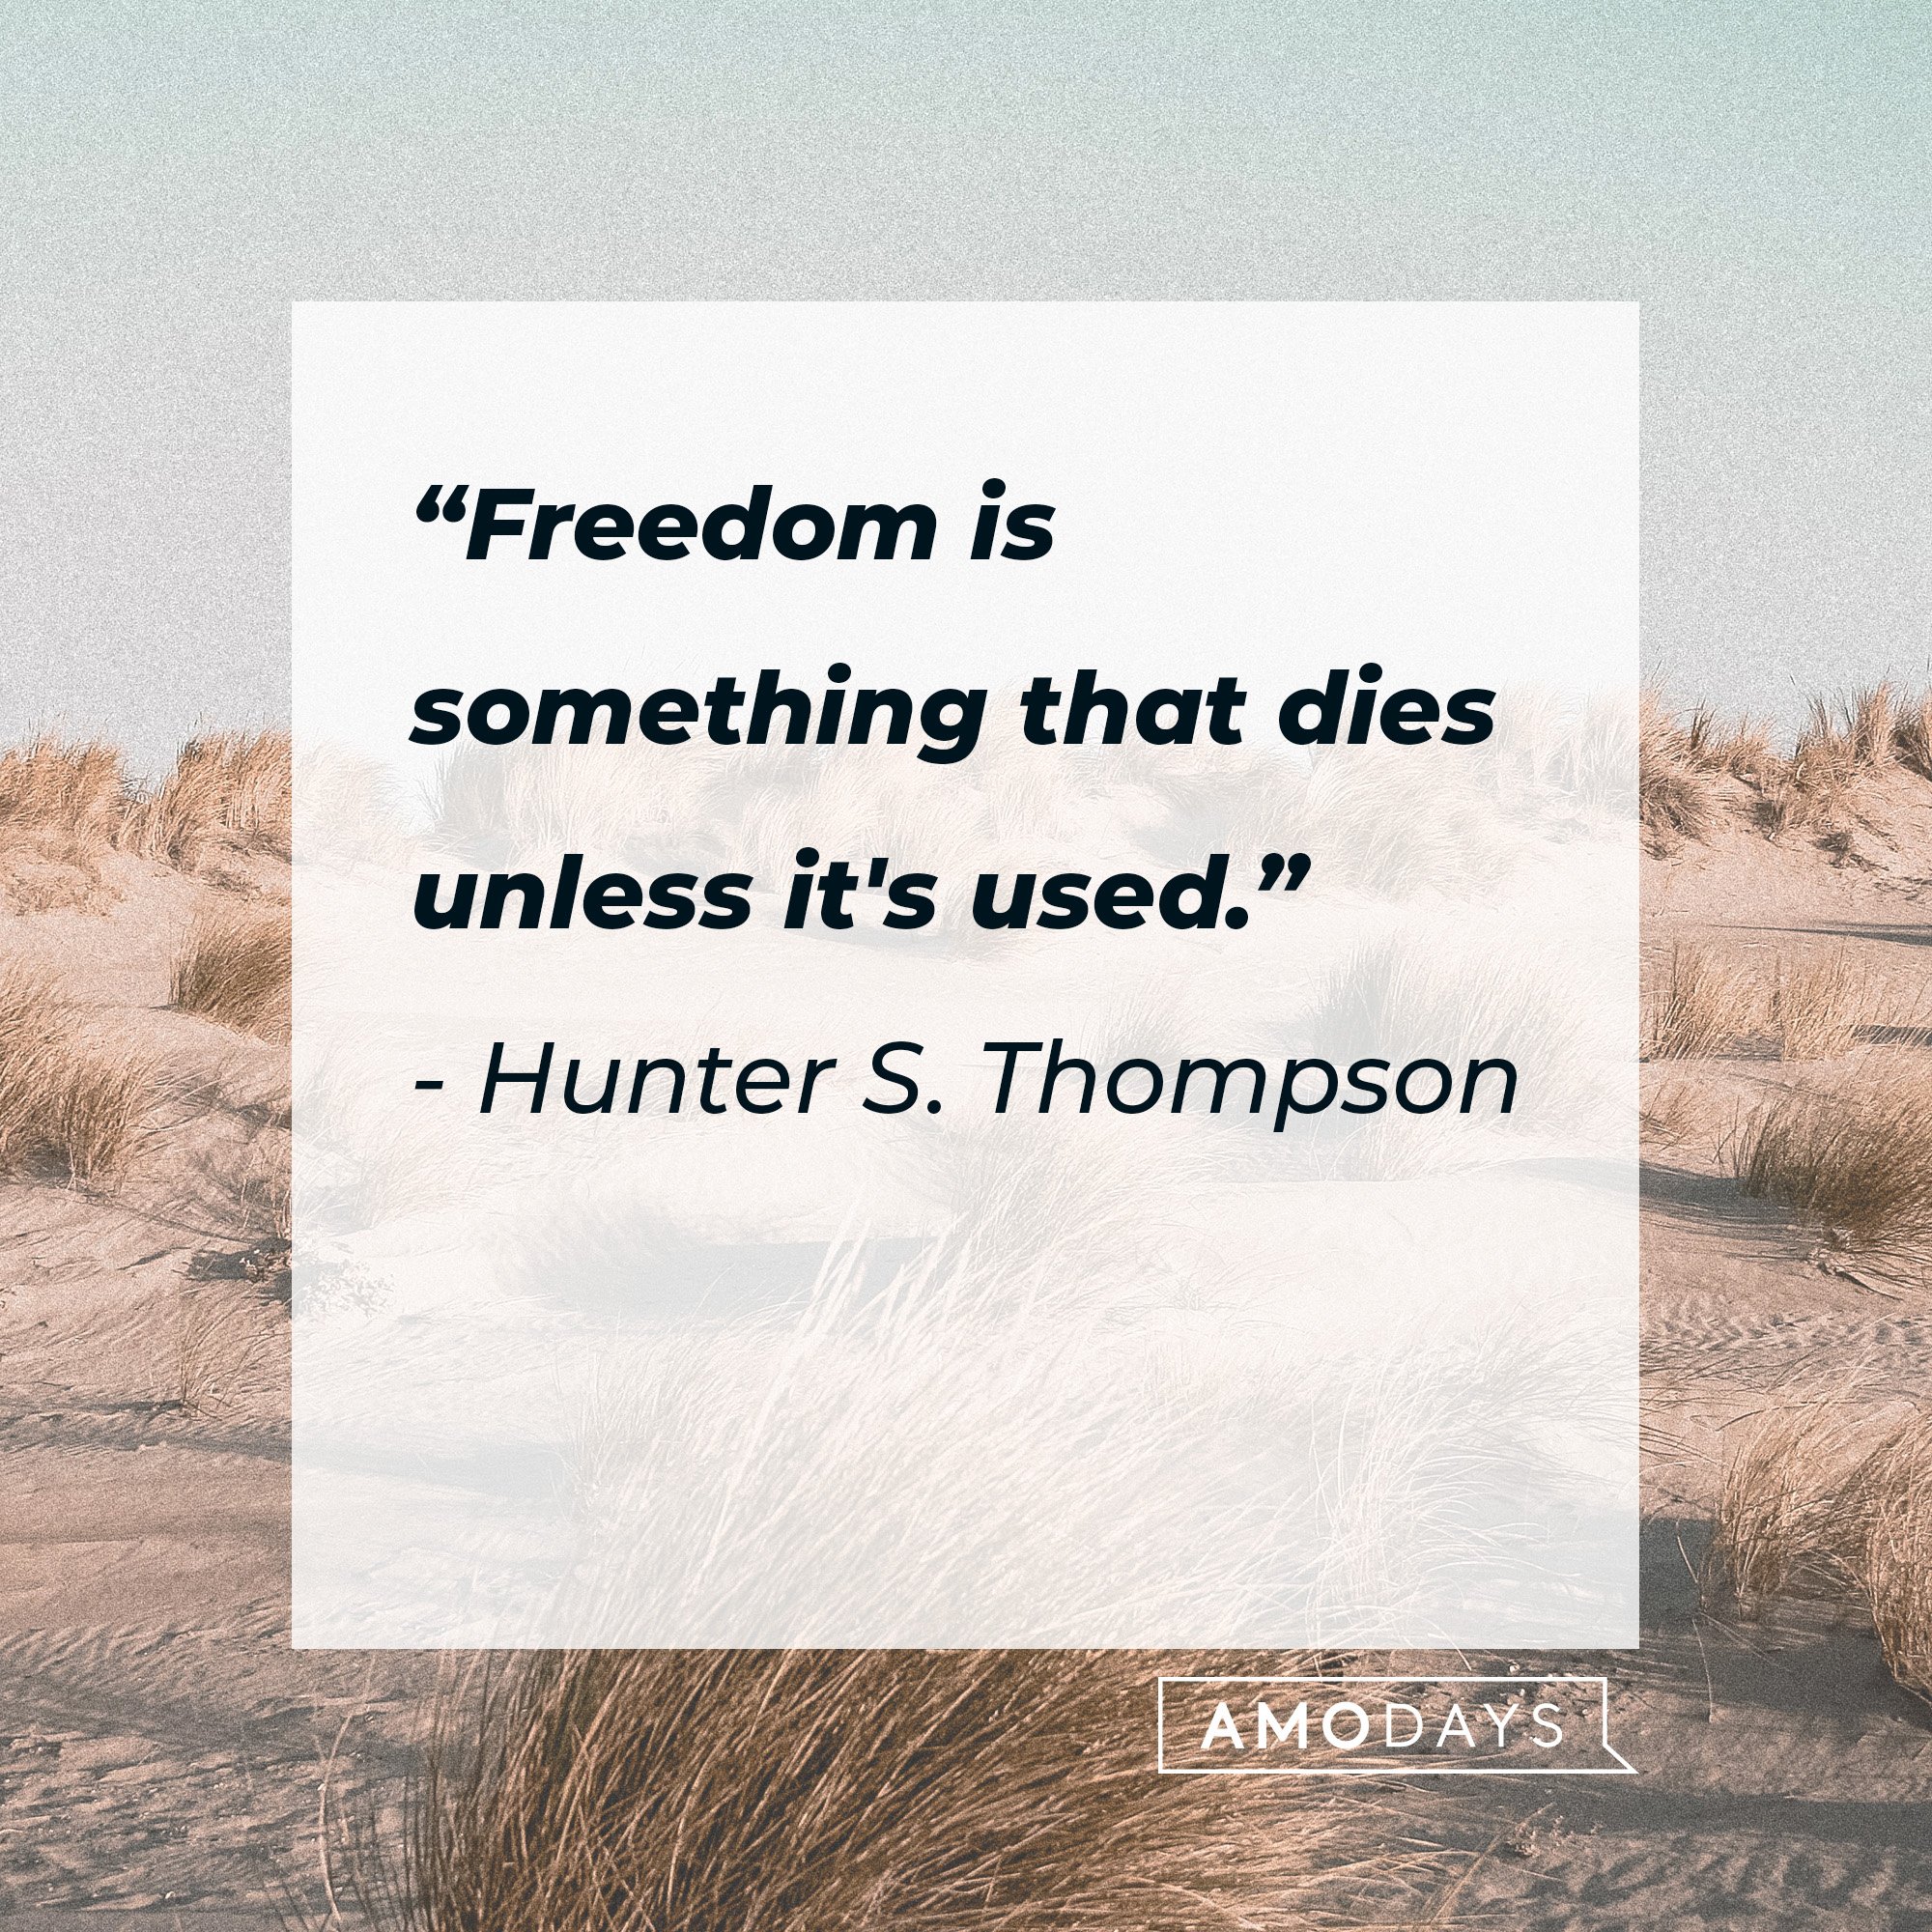 Hunter S. Thompson’s quote: “Freedom is something that dies unless it's used.” | Image: AmoDays